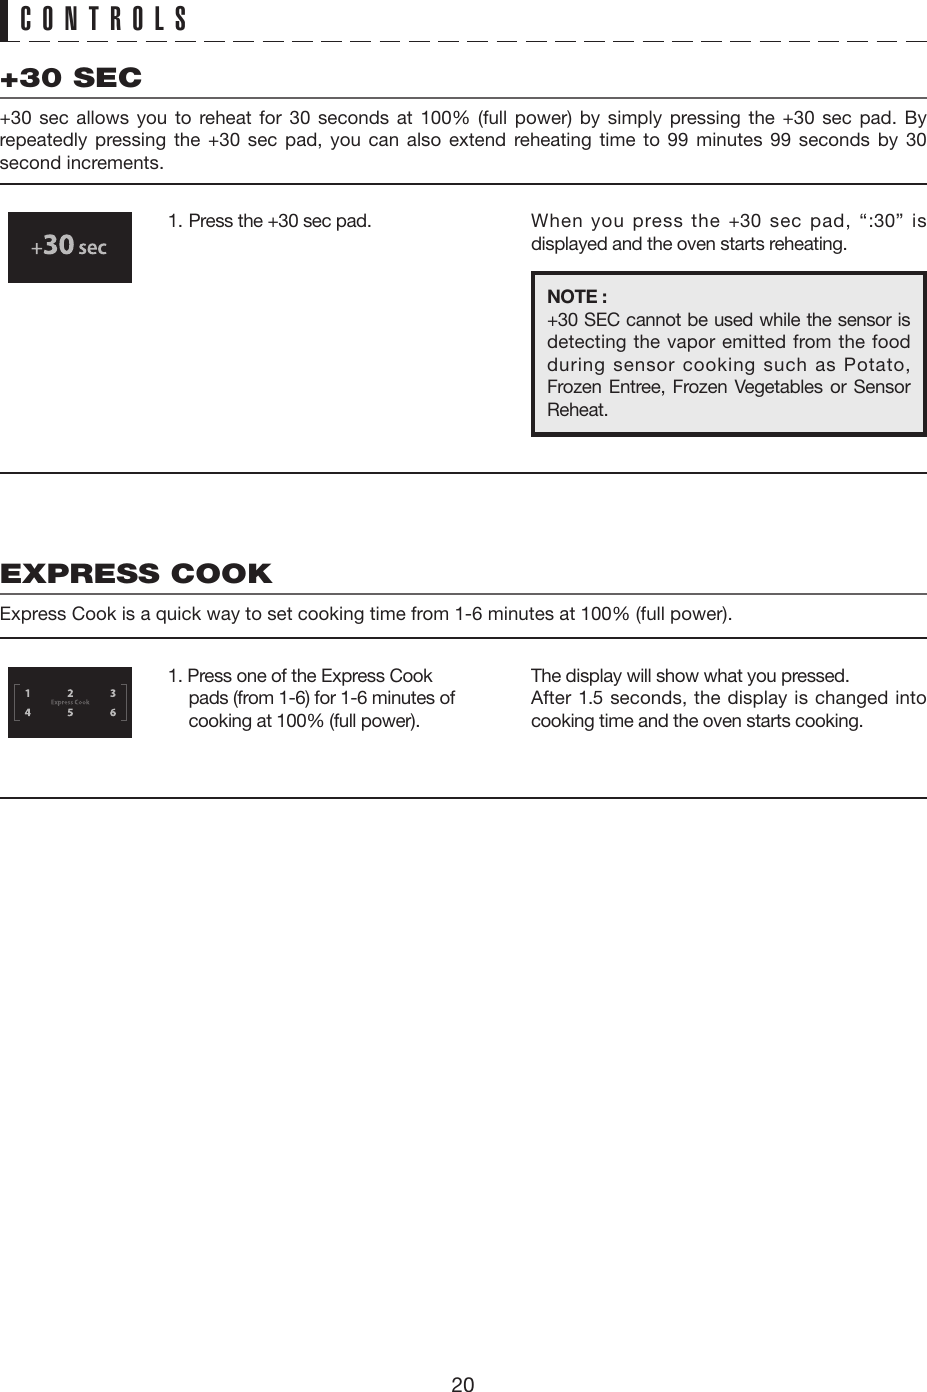 20CONTROLS+30 SEC+30 sec allows you to reheat for 30 seconds at 100% (full power) by simply pressing the +30 sec pad. By repeatedly pressing the +30 sec pad, you can also extend reheating time to 99 minutes 99 seconds by 30 second increments.EXPRESS COOKExpress Cook is a quick way to set cooking time from 1-6 minutes at 100% (full power).1.  Press the +30 sec pad.1. Press one of the Express Cook pads (from 1-6) for 1-6 minutes of cooking at 100% (full power).When you press the +30 sec pad, “:30” is displayed and the oven starts reheating.The display will show what you pressed.After 1.5 seconds, the display is changed into cooking time and the oven starts cooking.NOTE :+30 SEC cannot be used while the sensor is detecting the vapor emitted from the food during sensor cooking such as Potato, Frozen Entree, Frozen Vegetables or Sensor Reheat.   